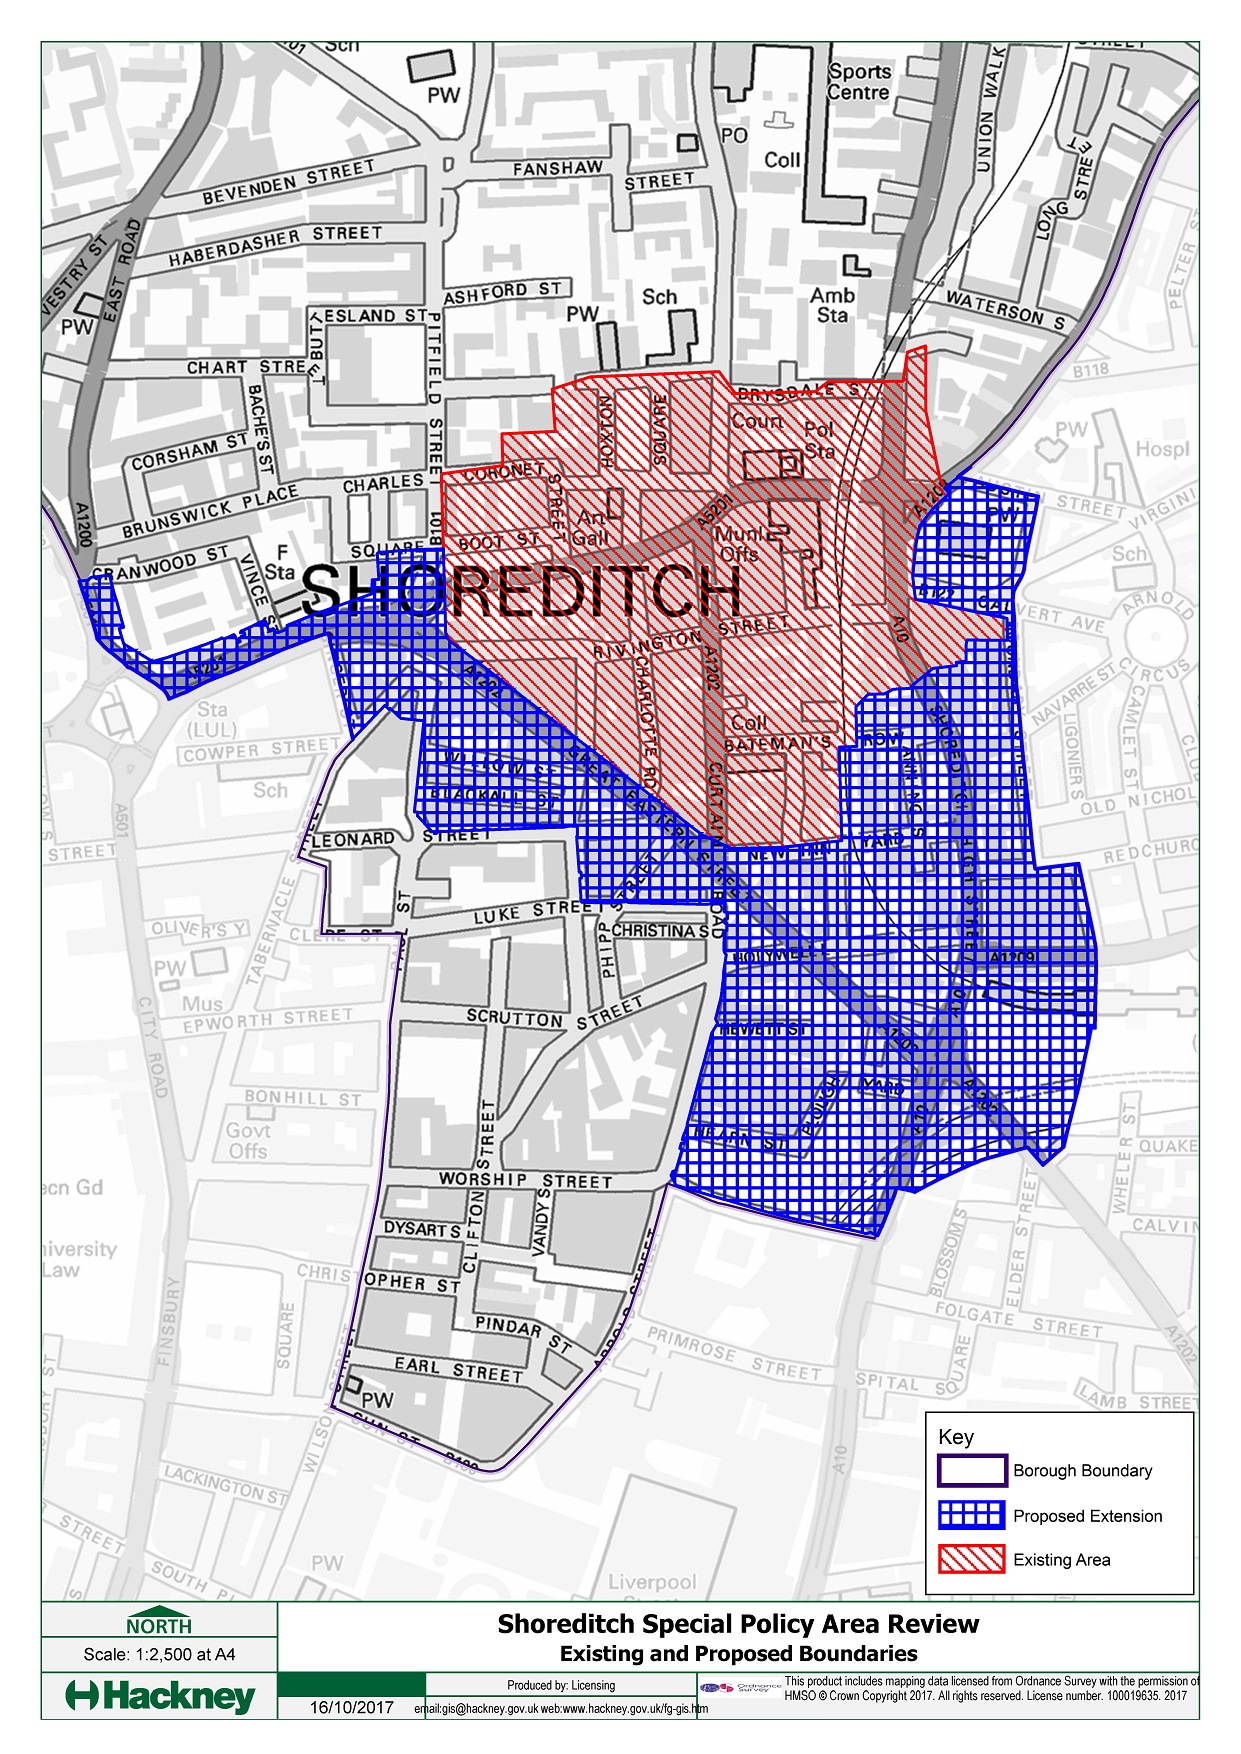 Map Of Existing And Proposed Shoreditch SPA 